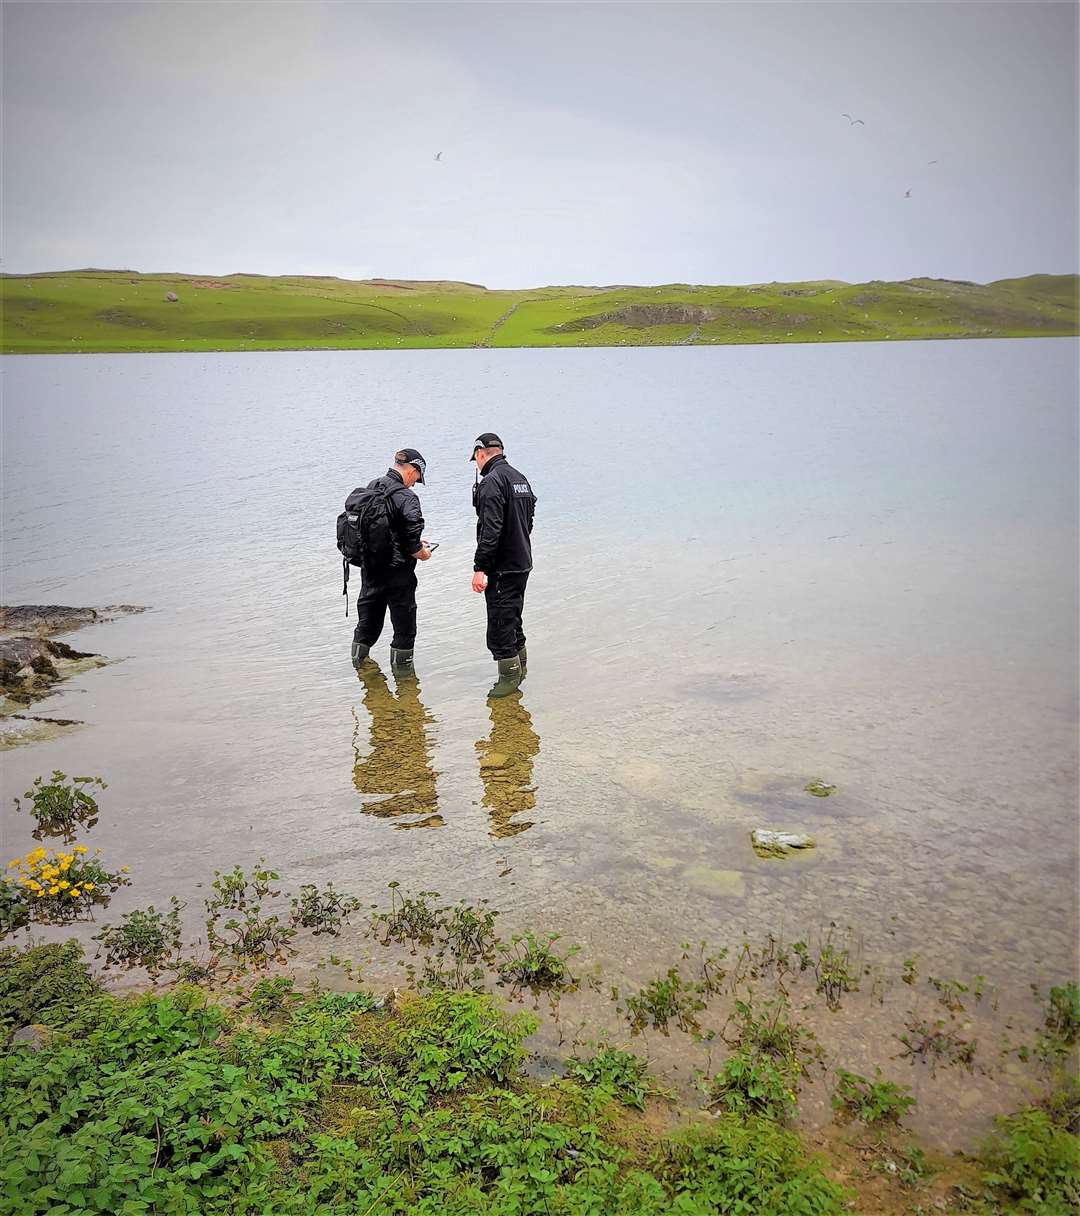 Officers recovering the broken eggs from the Loch.